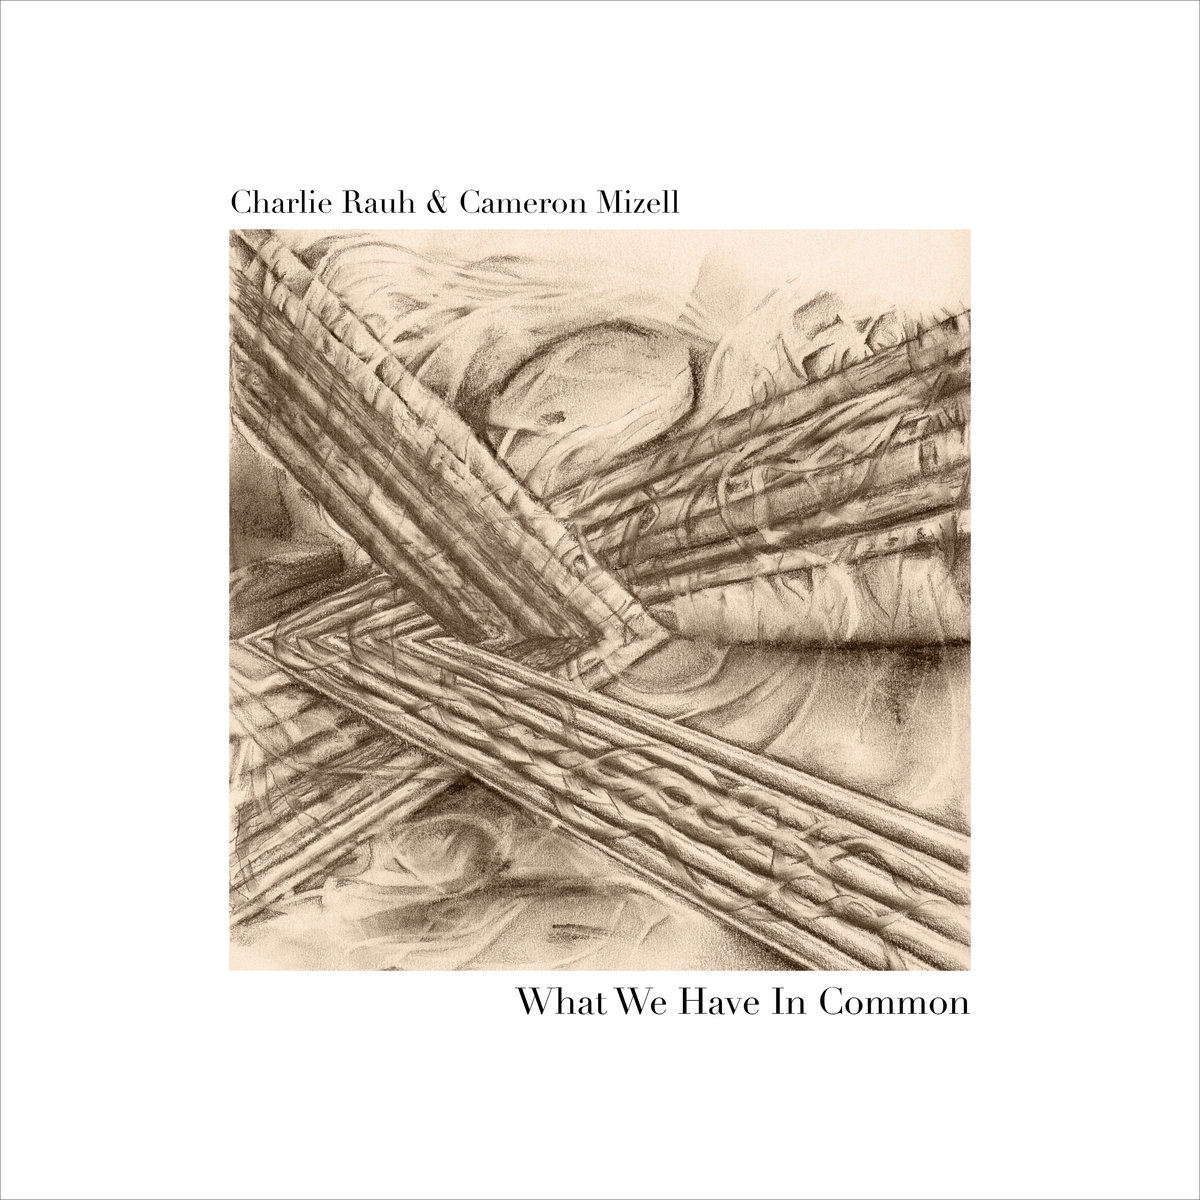 Charlie Rauh & Cameron Mizell — What We Have in Common